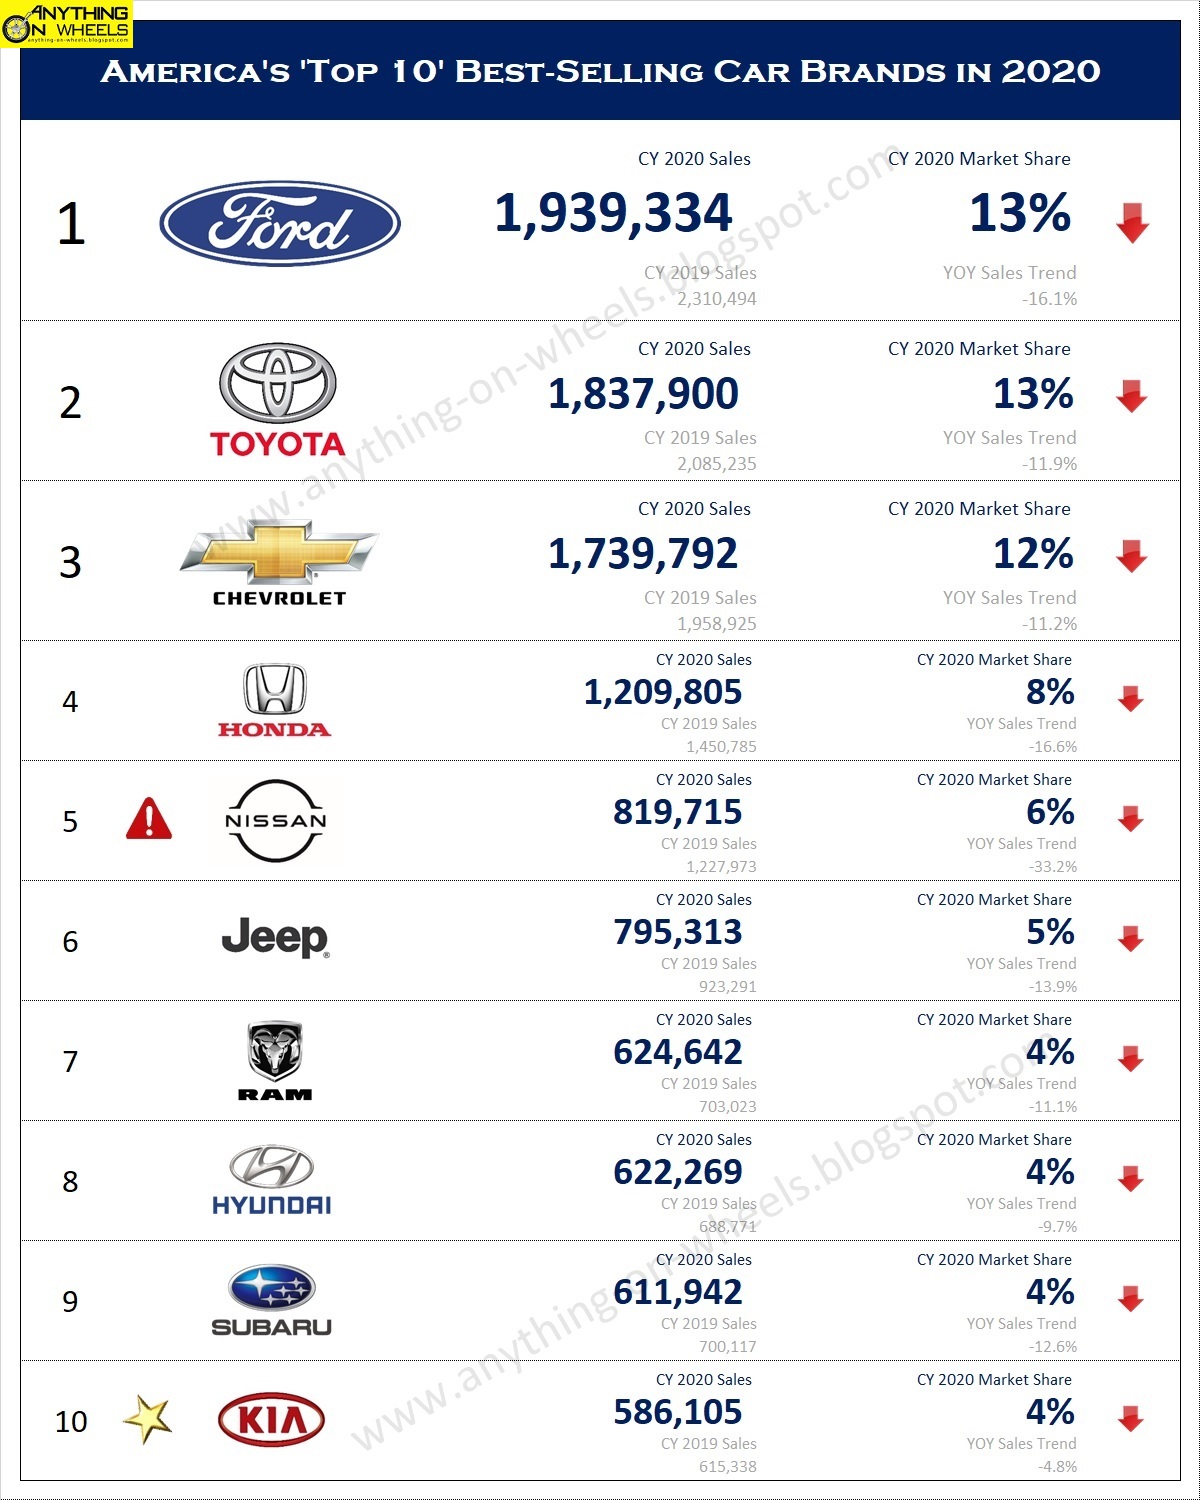 ANYTHING ON WHEELS: America's "Top 10" Best-selling Car Brands in 2020